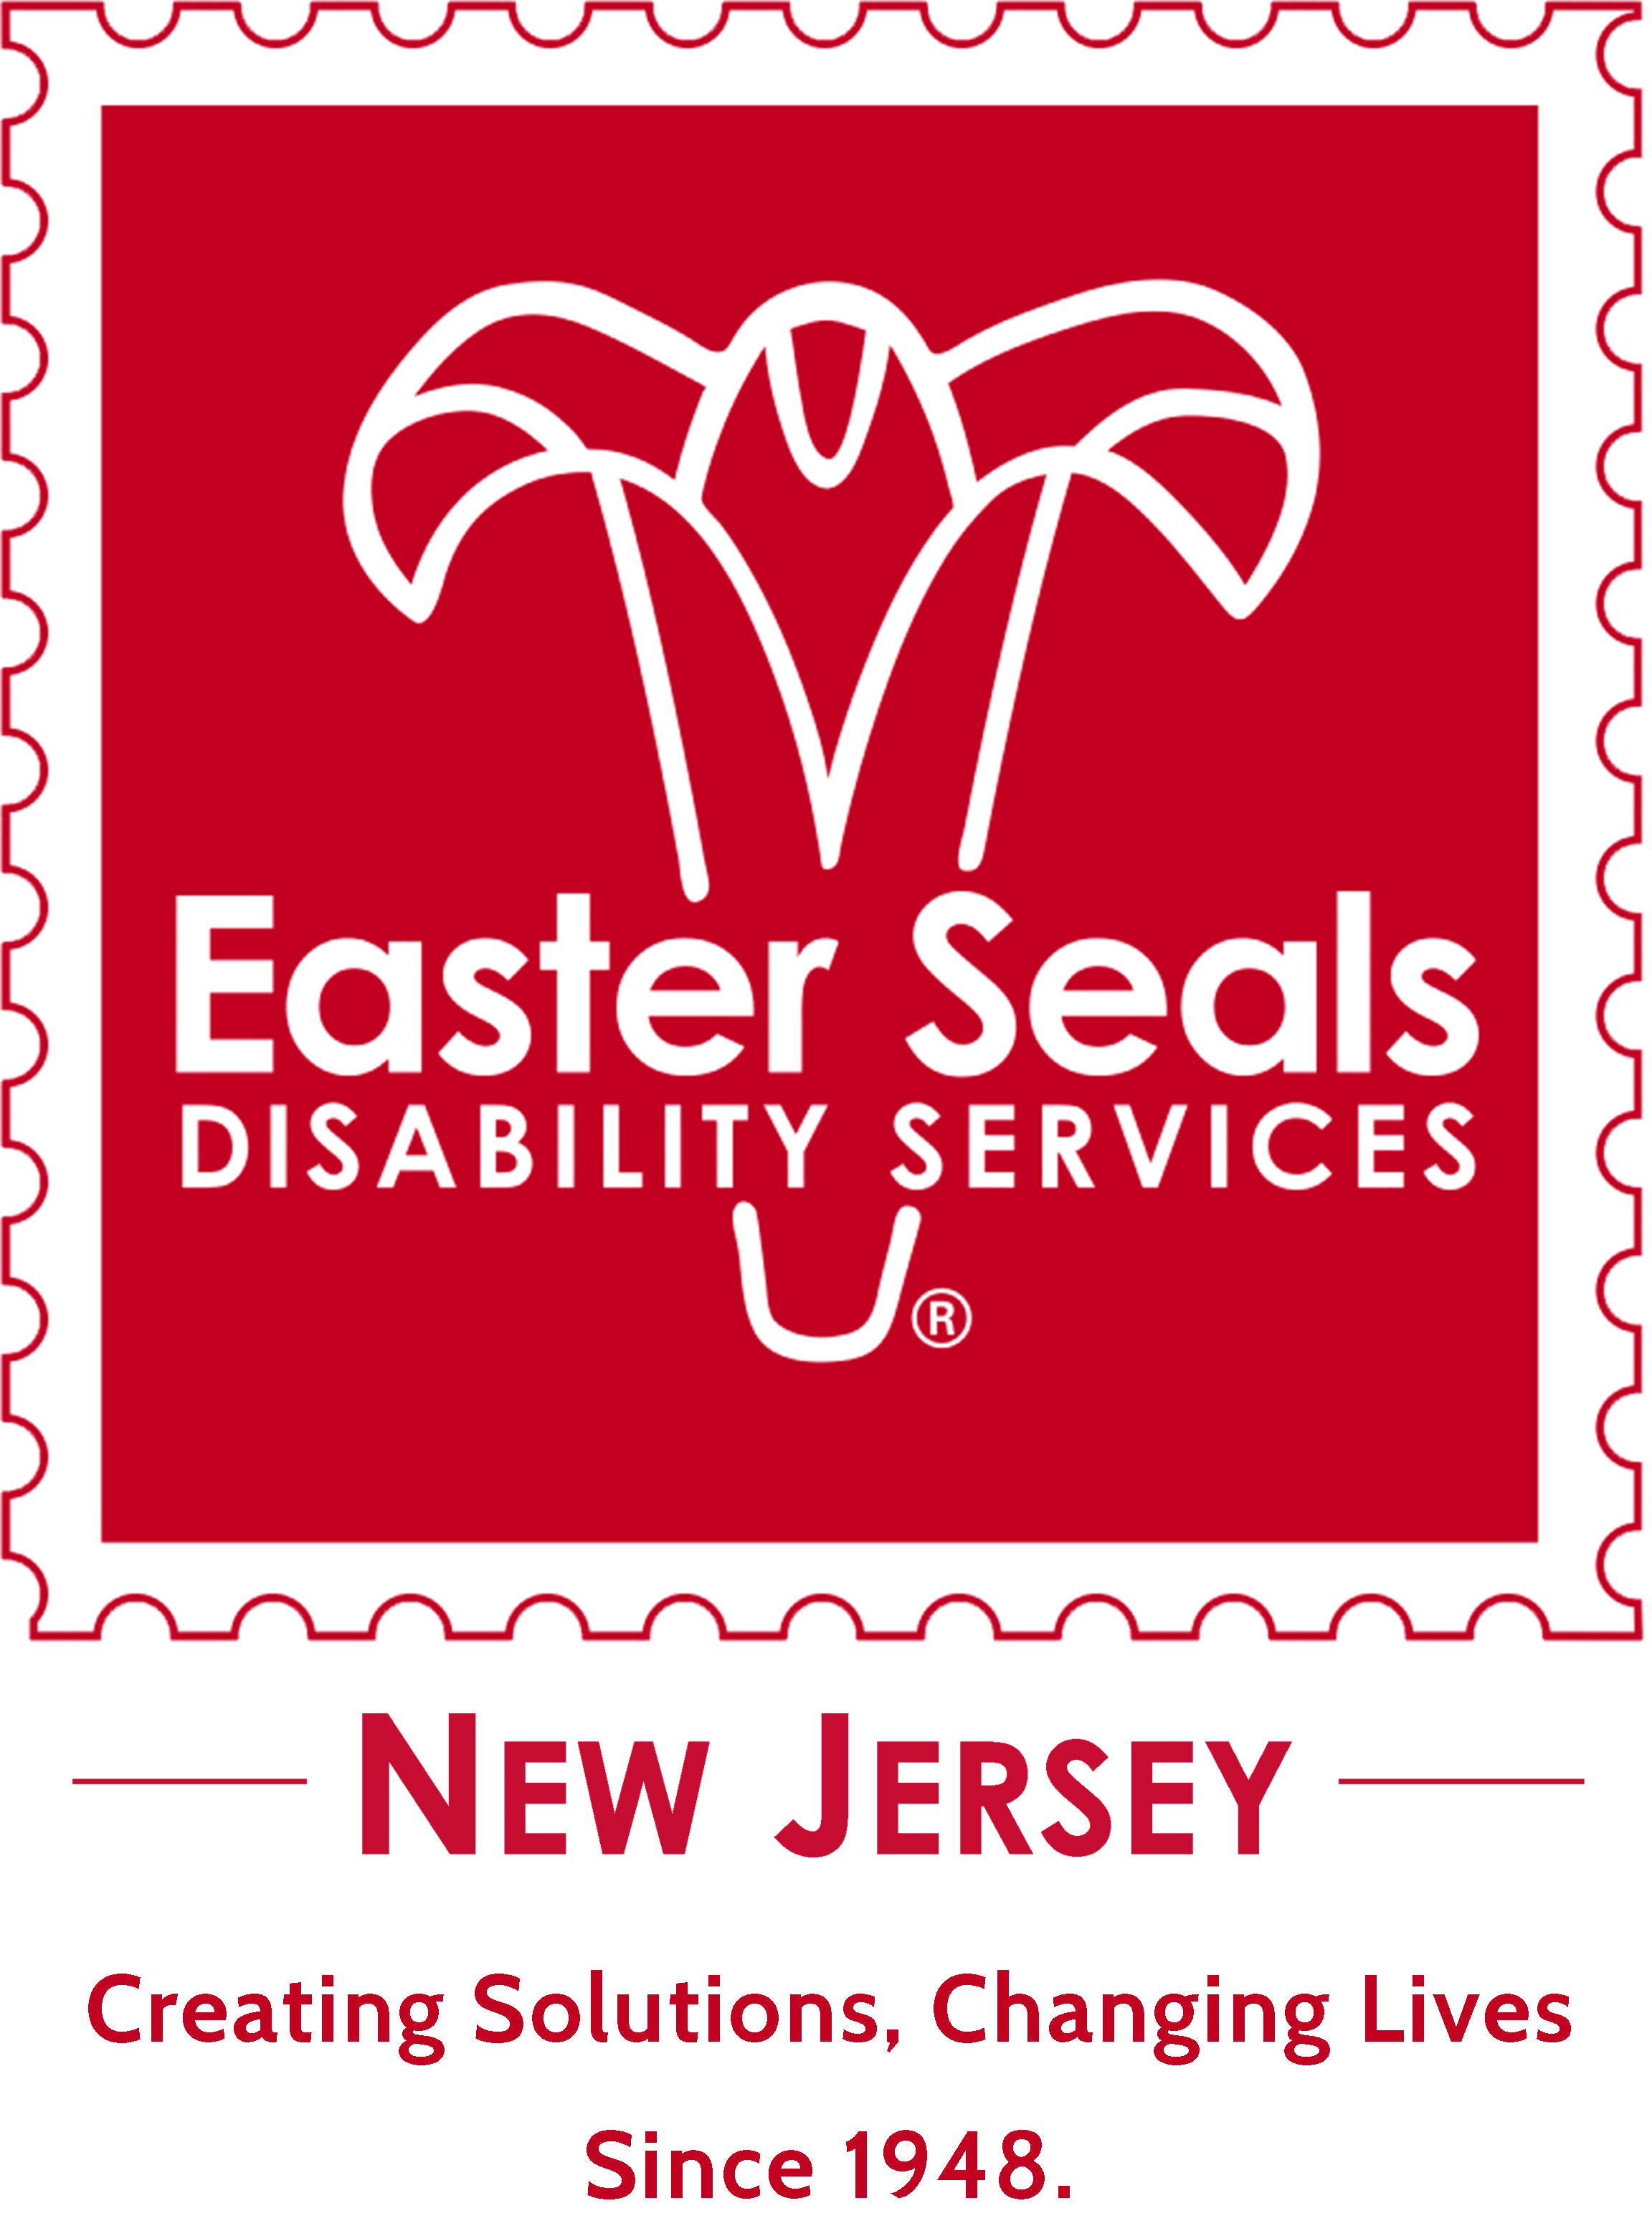 Easter Seals New Jersey - Creating Solutions, Changing Lives since 1948.